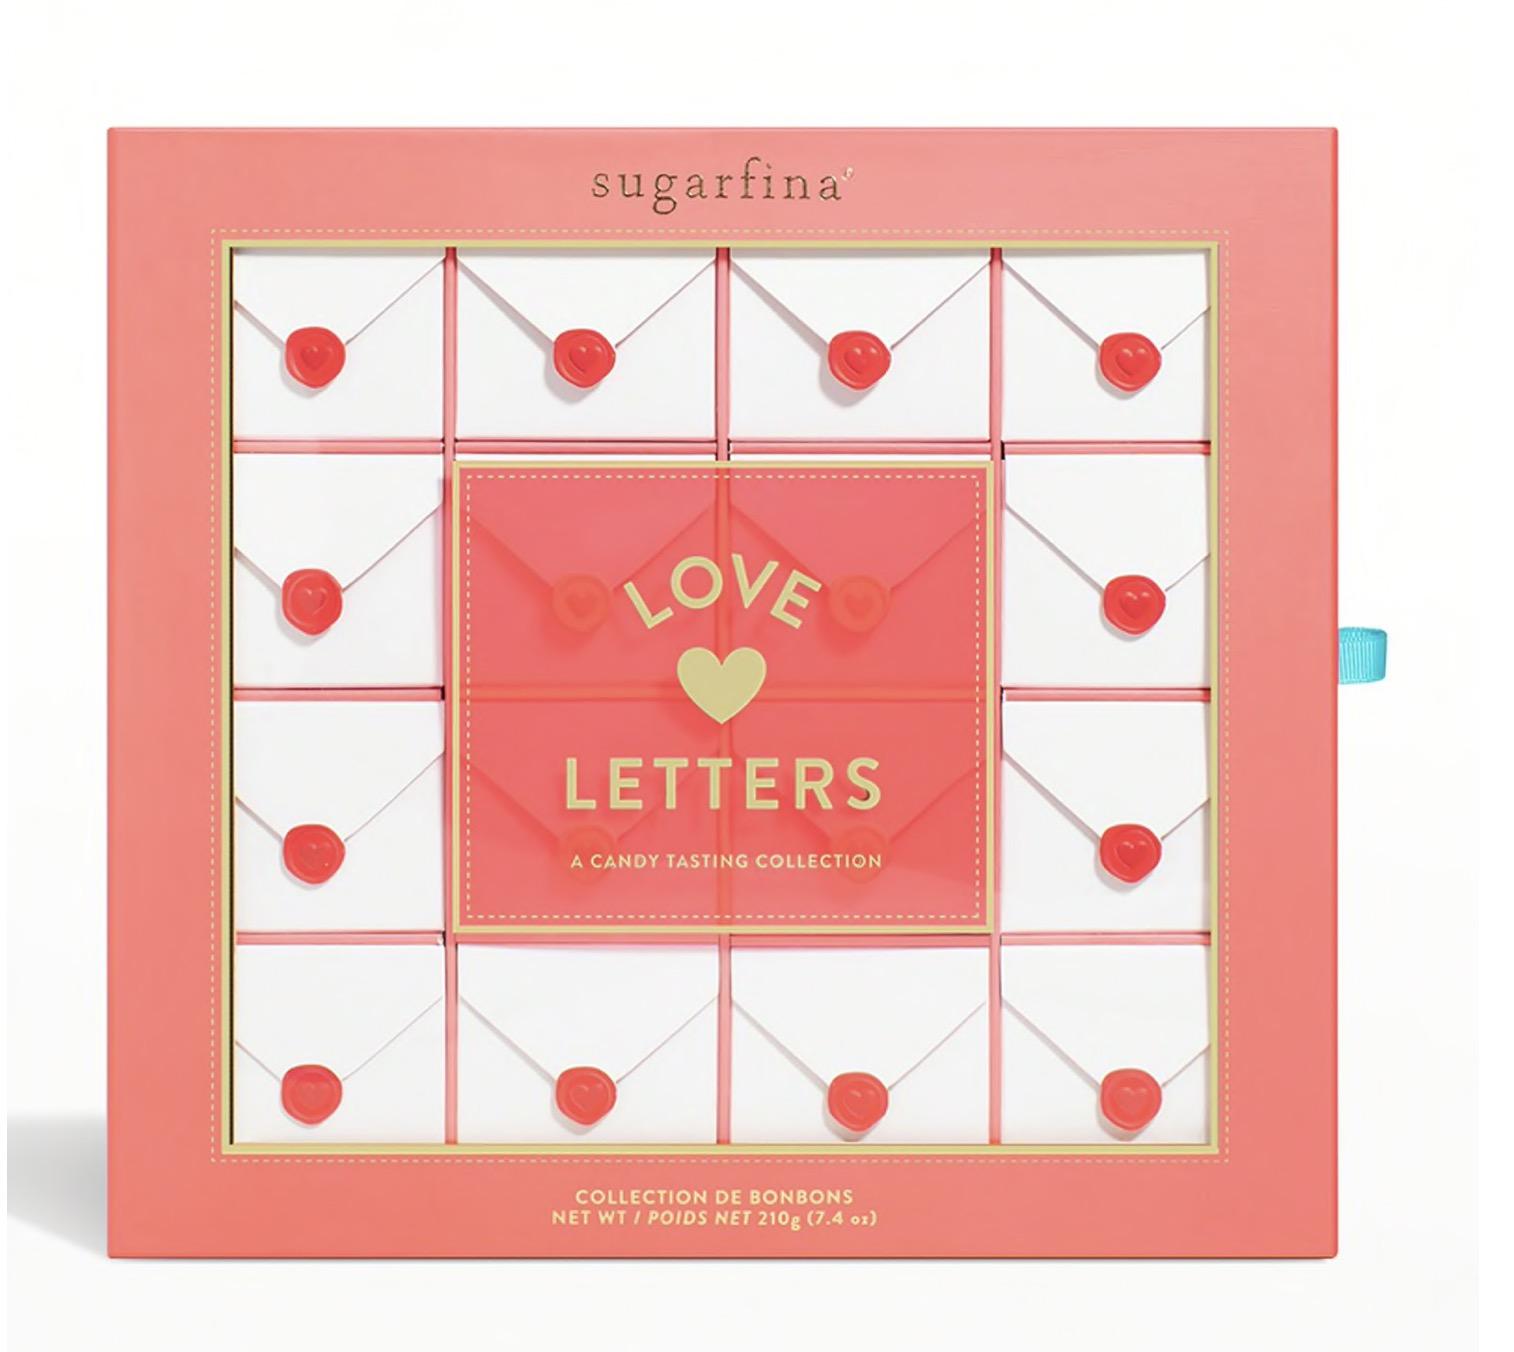 Sugarfina 2022 Valentine’s Day Love Letters Tasting Box Advent Calendar – Now Available